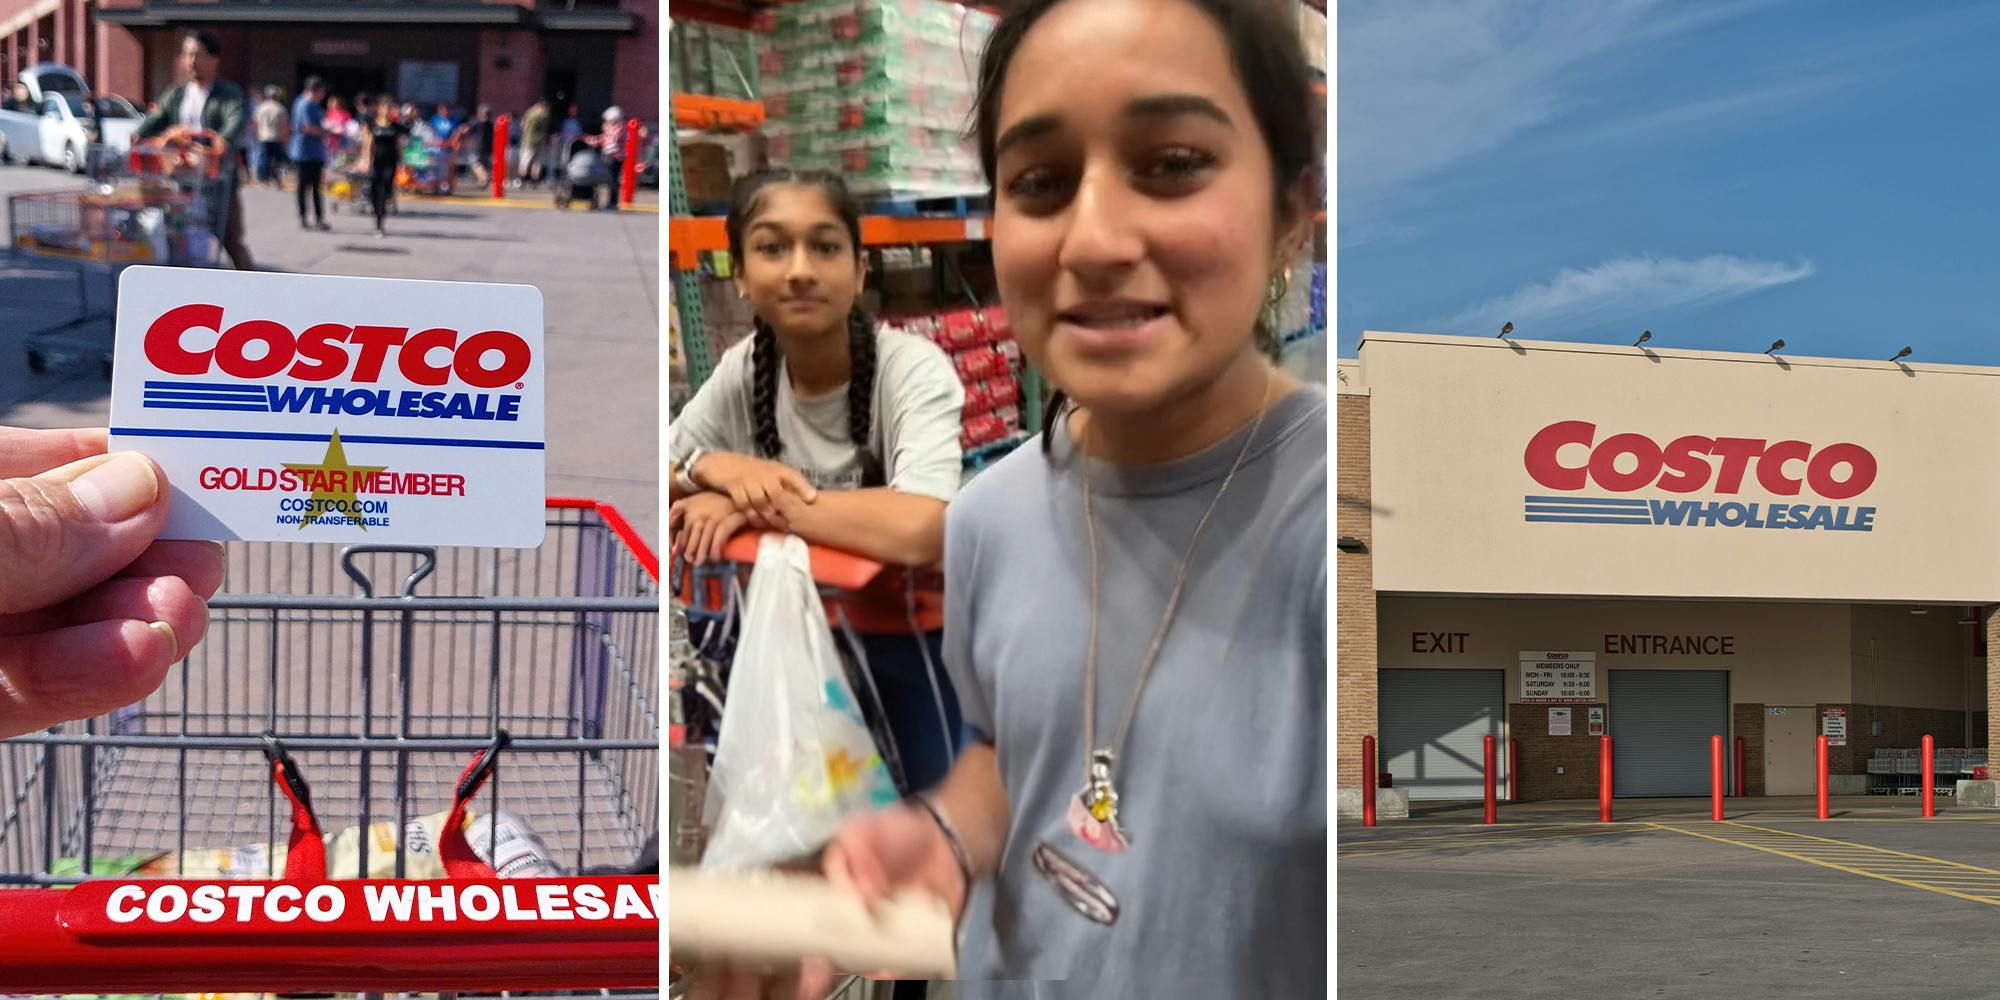 ‘They’re way too strict’: Costco customers use family card to grocery shop in-store. It backfires